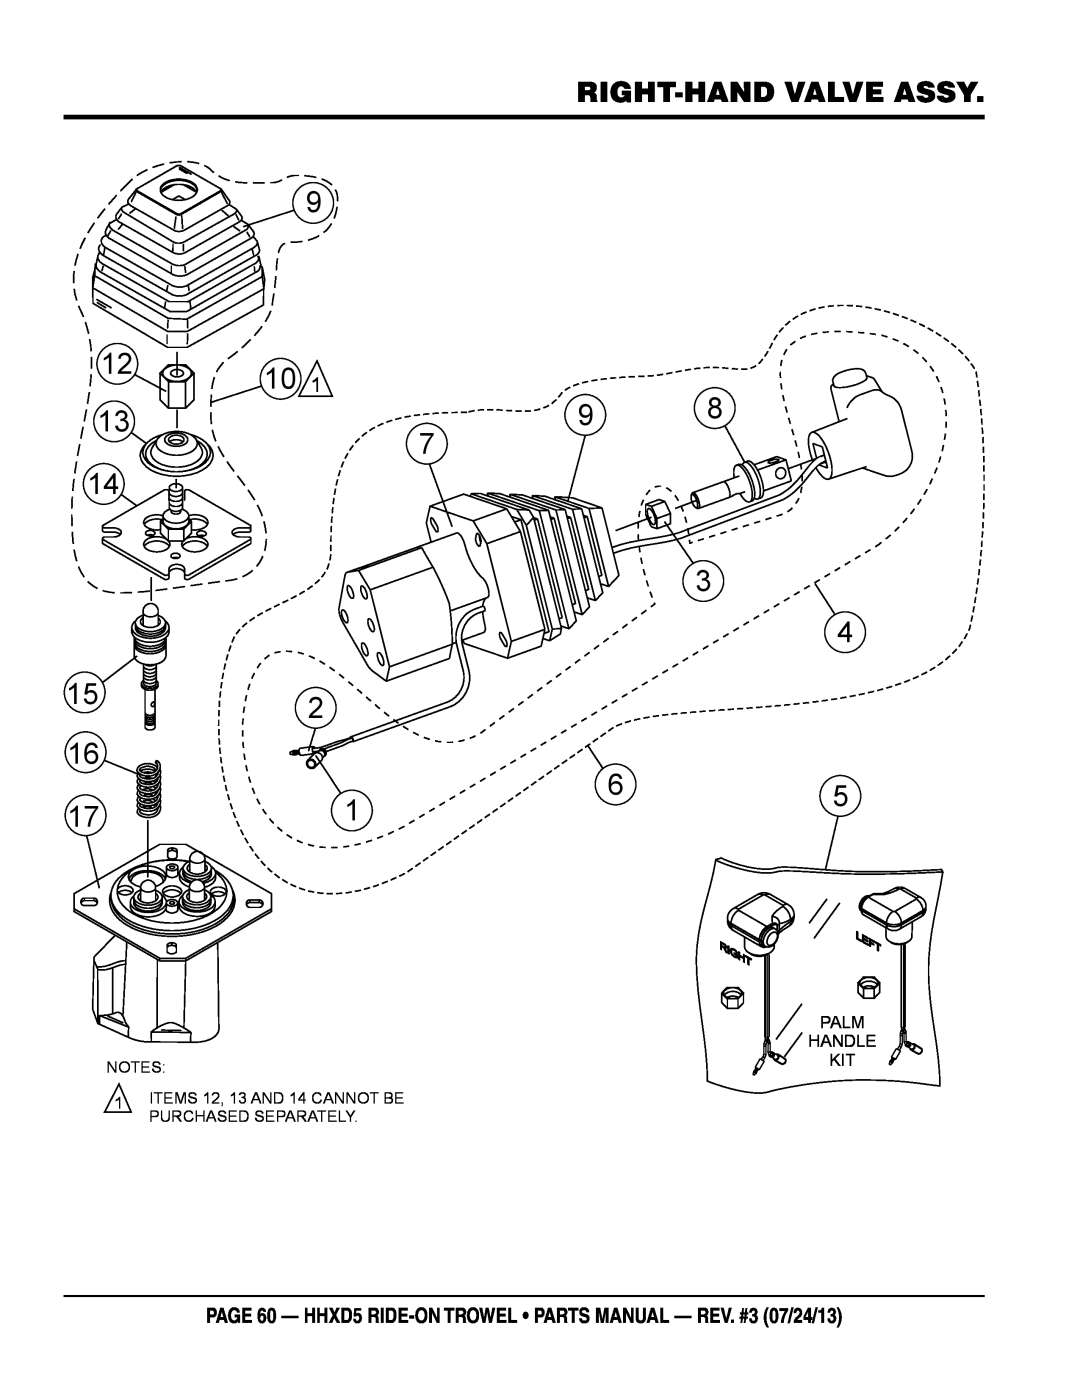 Multiquip HHSD5 right-hand valve assy, page 60 - HHXD5 RIDE-ON TROWEL parts manual - rev. #3 07/24/13, Palm, Handle 